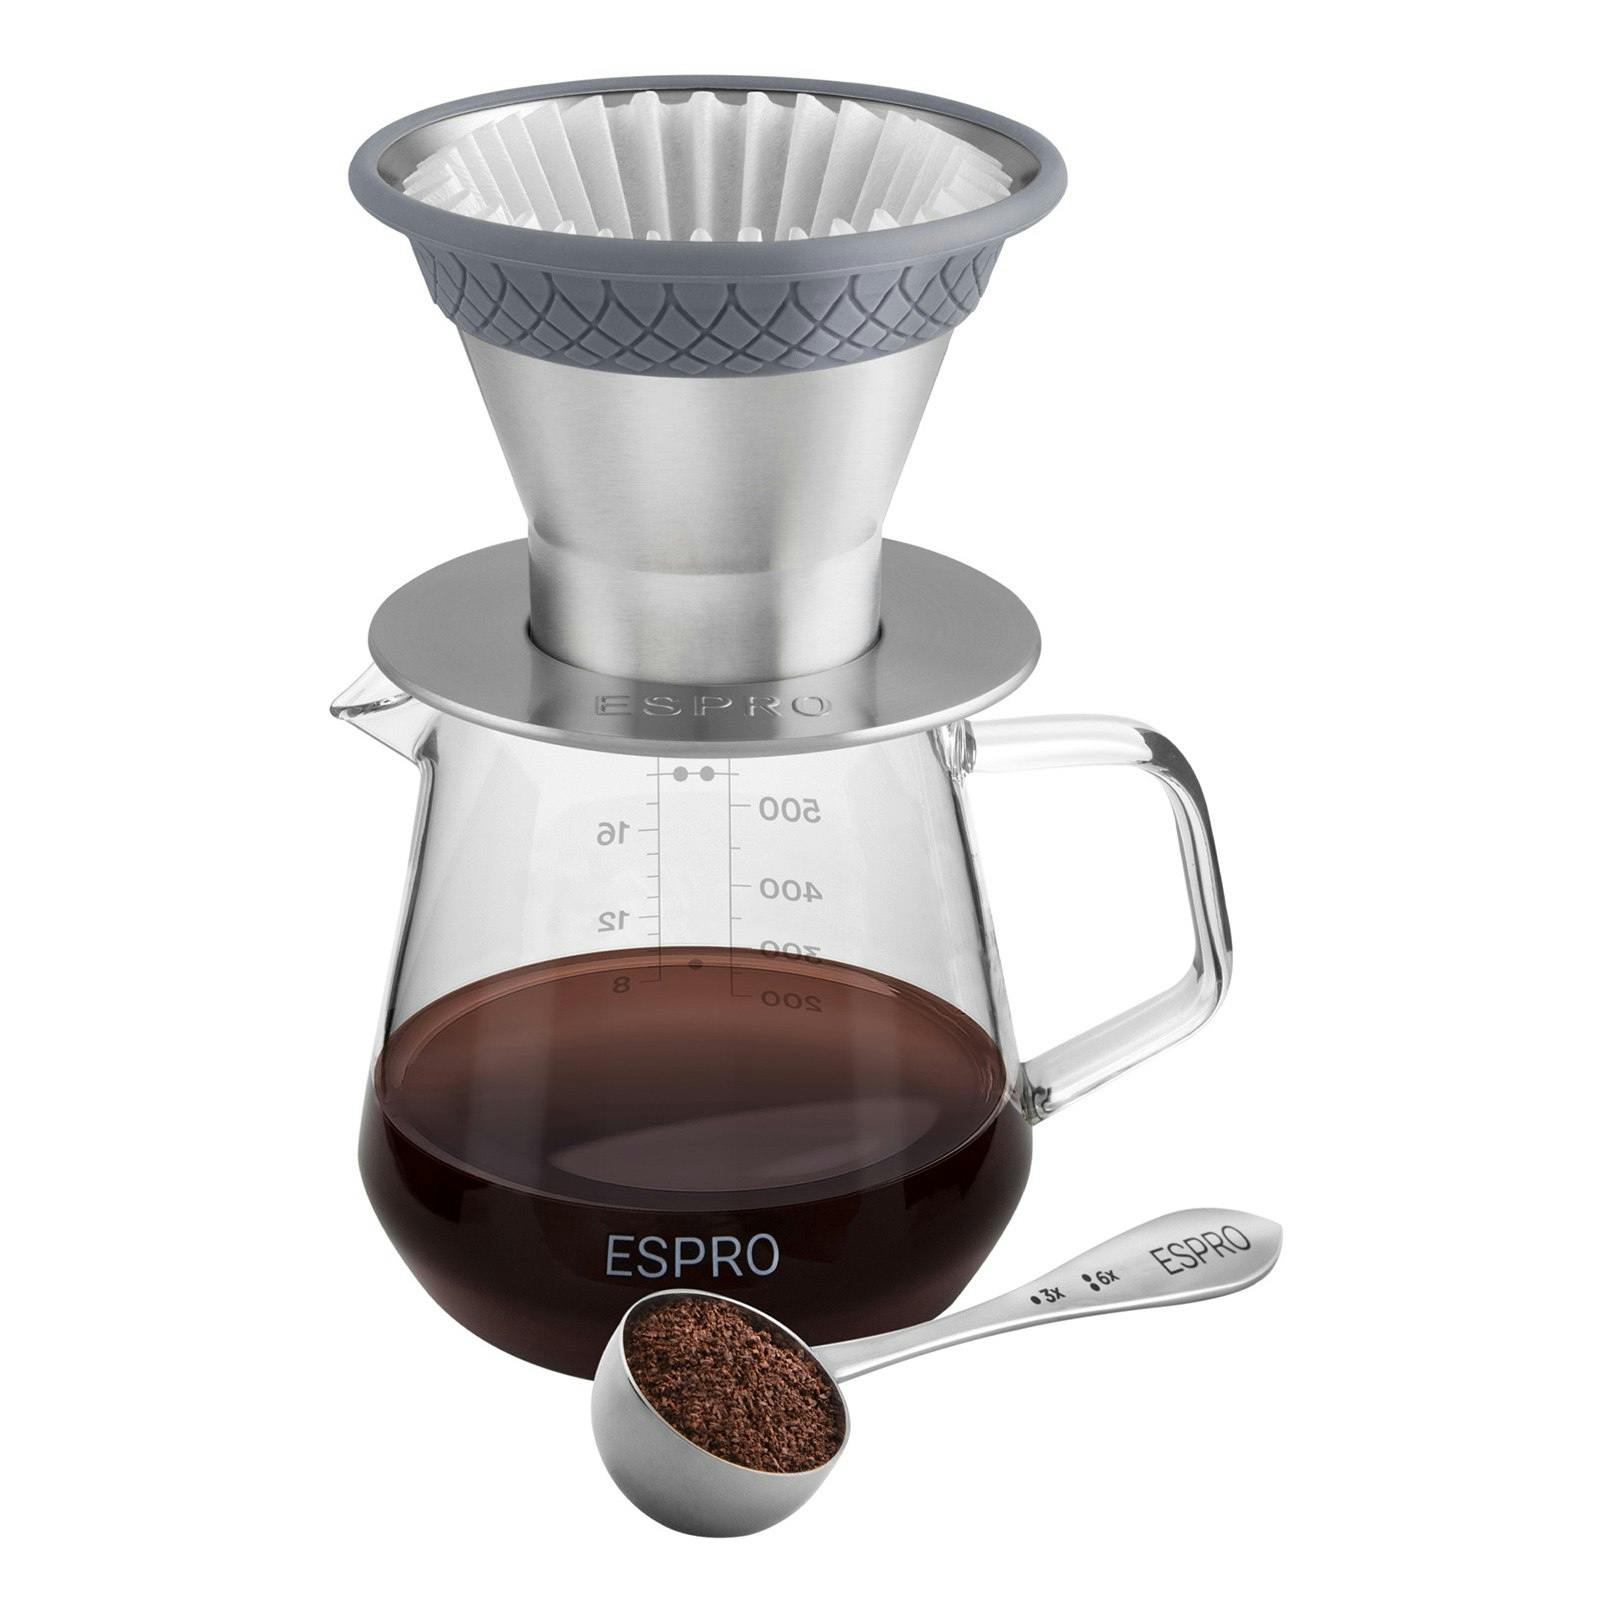 https://huckberry.imgix.net/spree/products/681970/original/77763_Espro_Bloom_Pour_Over_Coffee_Brewer_Kit_Clear_01_WEB.jpg?auto=format%2C%20compress&crop=top&fit=clip&cs=tinysrgb&ixlib=react-9.5.2